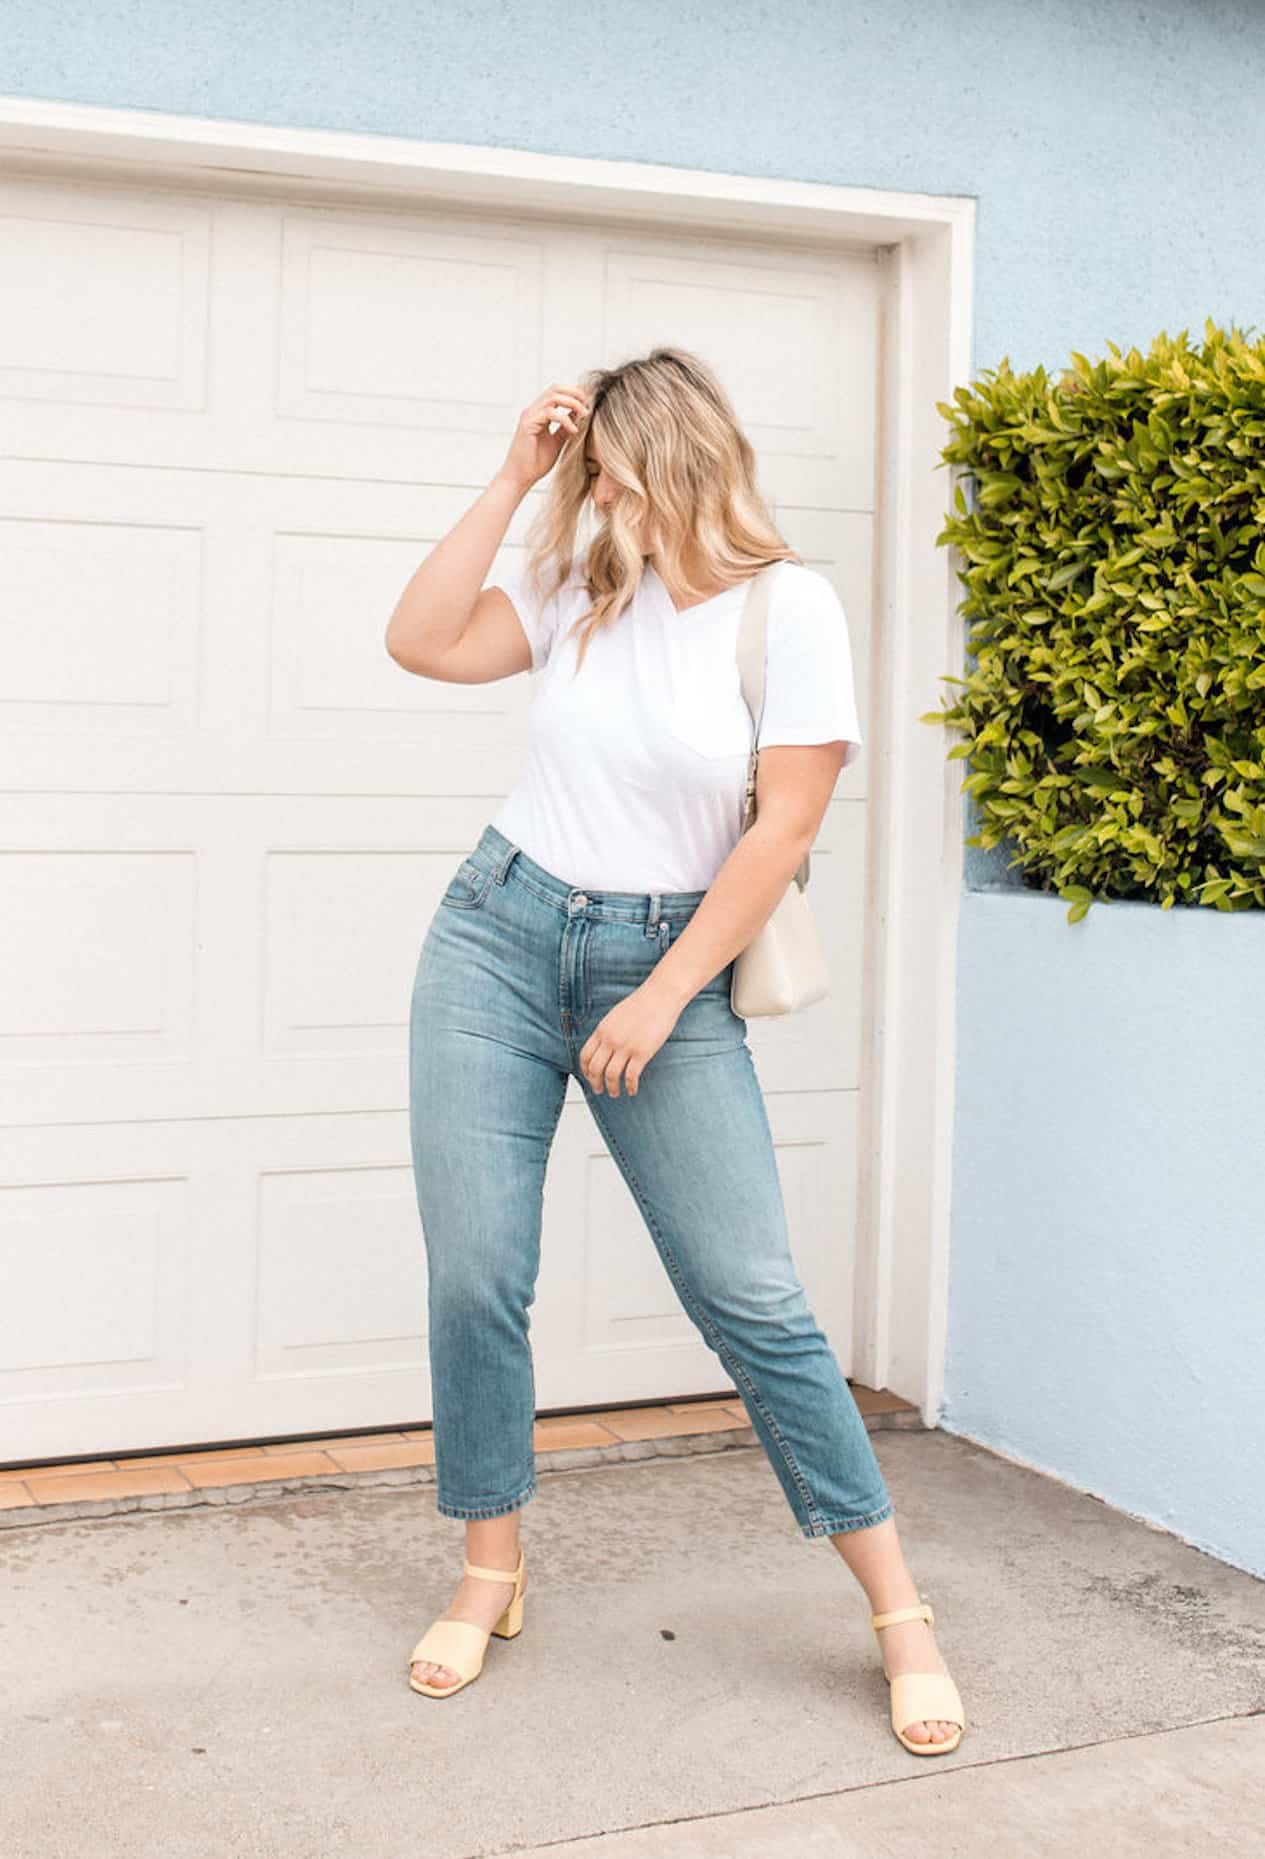 image of a curvy blonde woman wearing a white t-shirt, blue jeans, and sandals standing in front of a white garage door